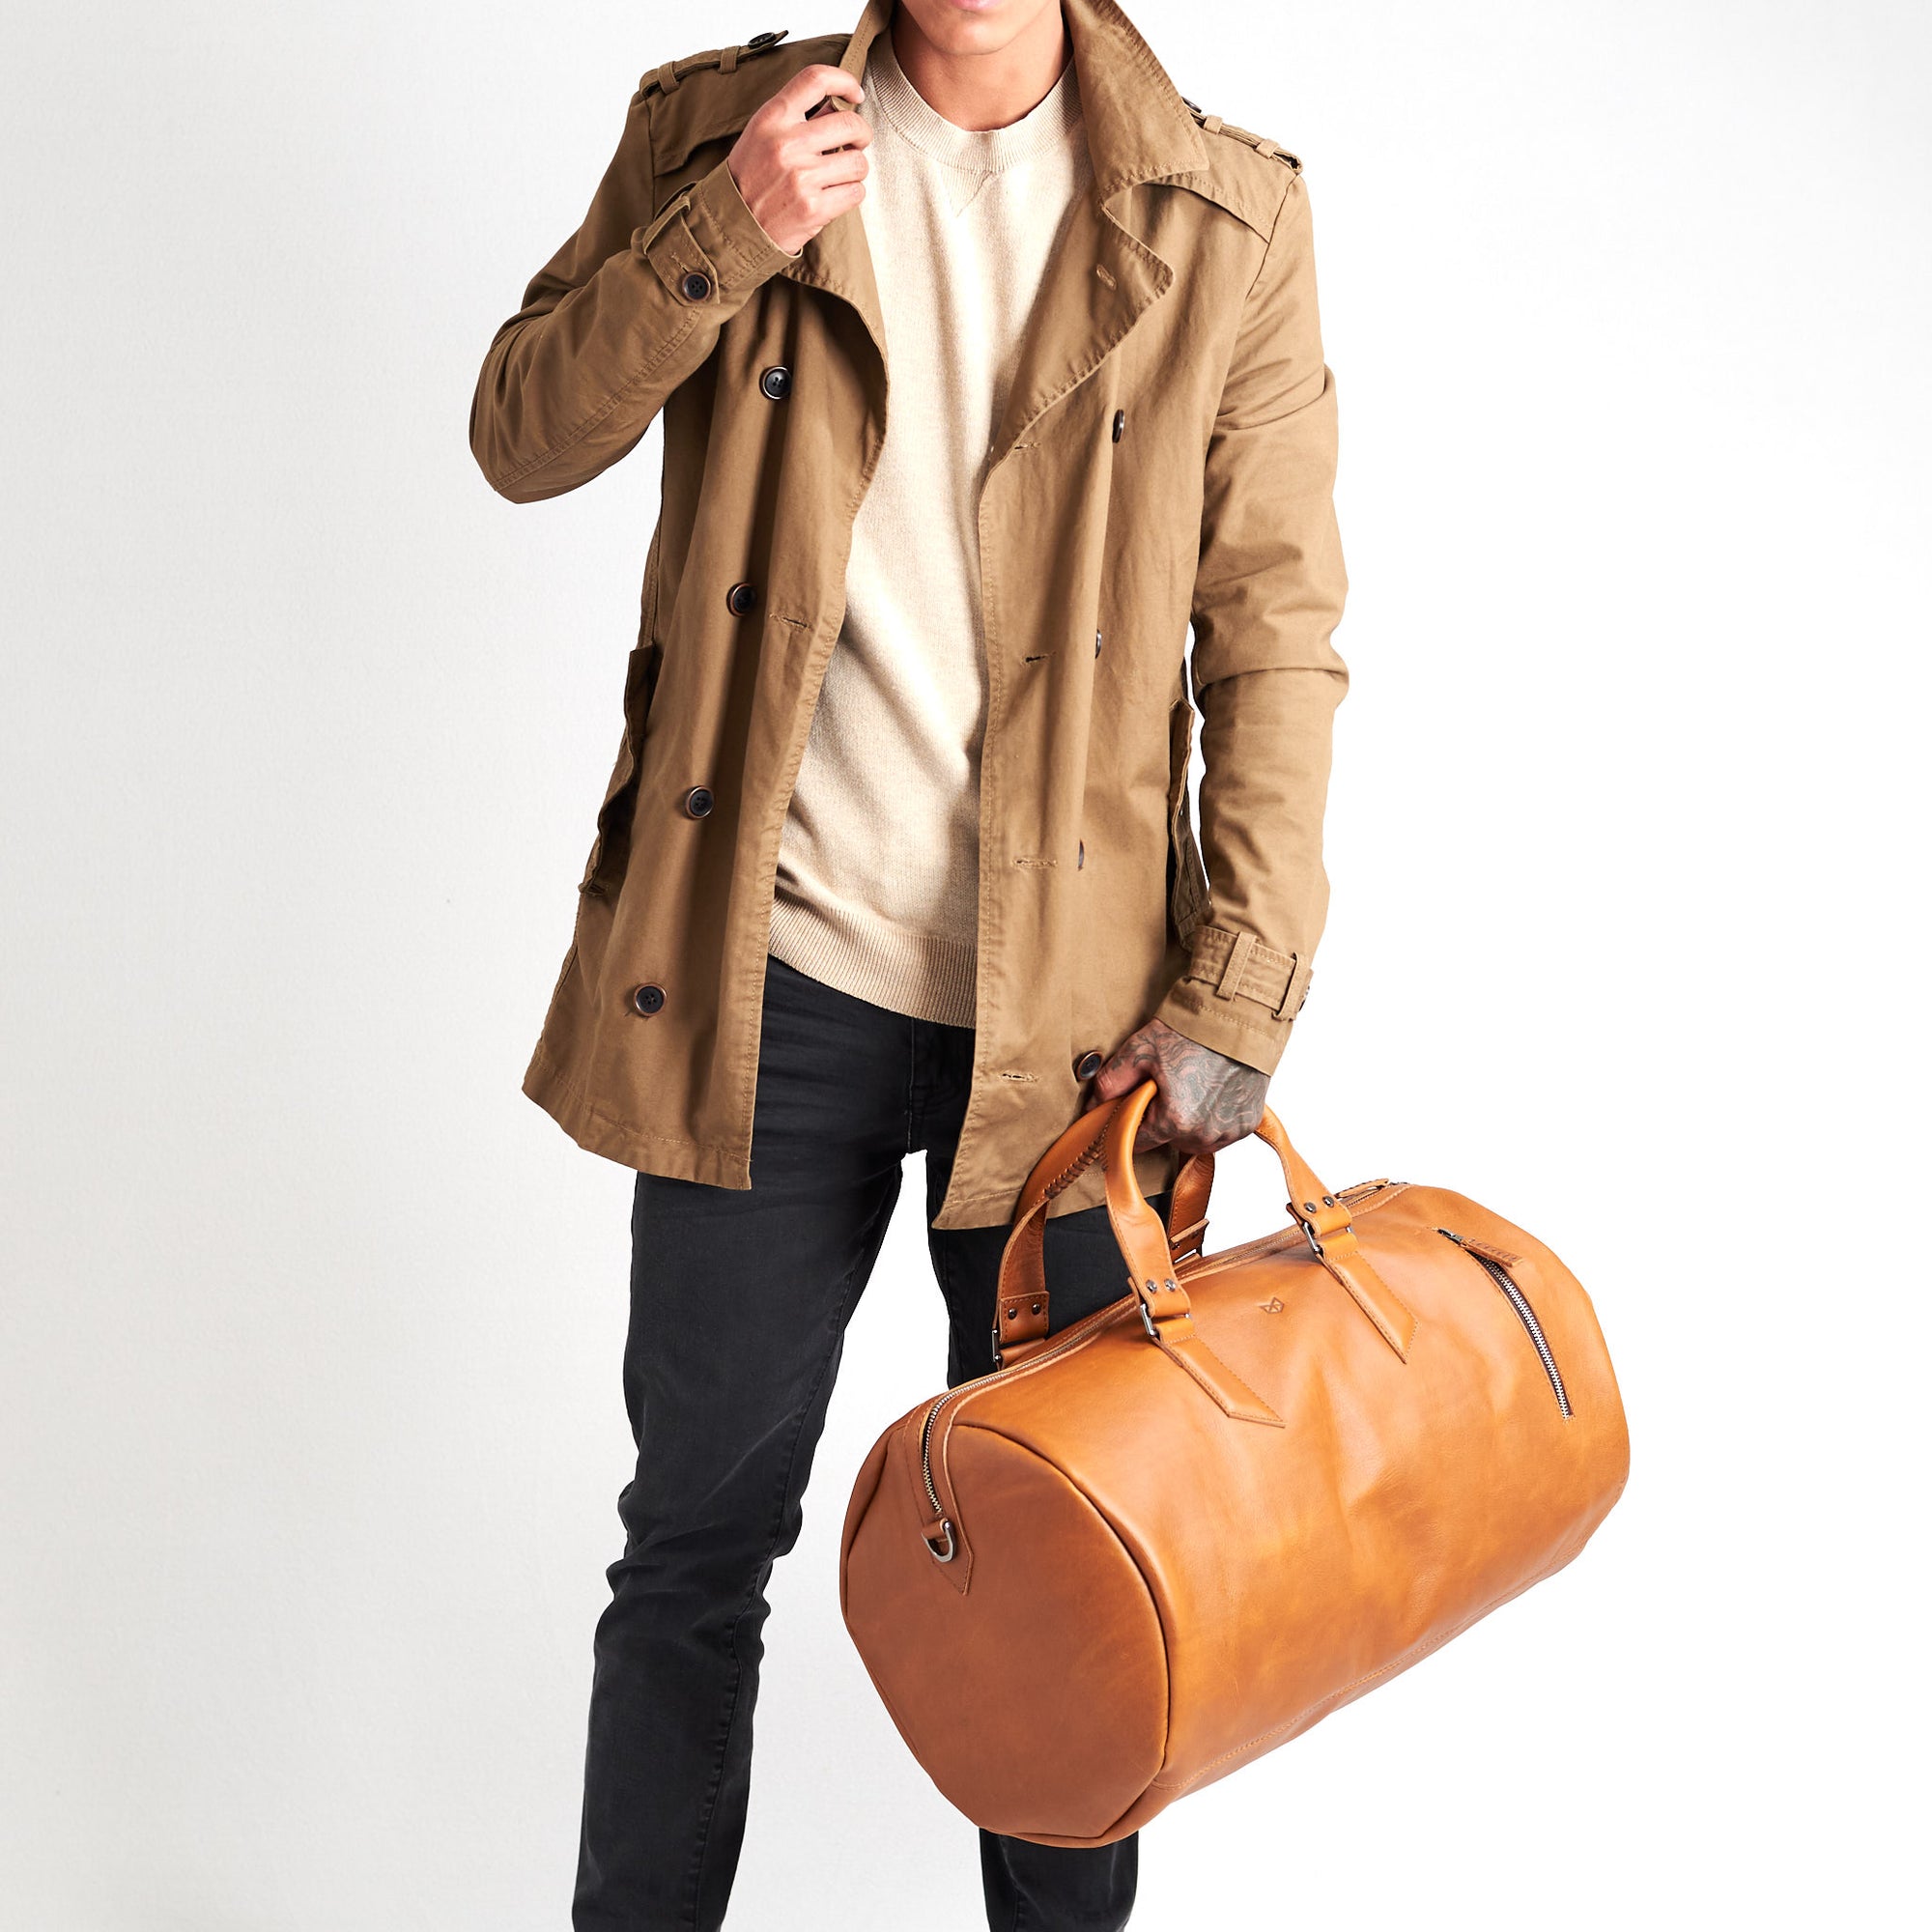 Substantial duffle bag tan by Capra Leather. Style semi side carry. 